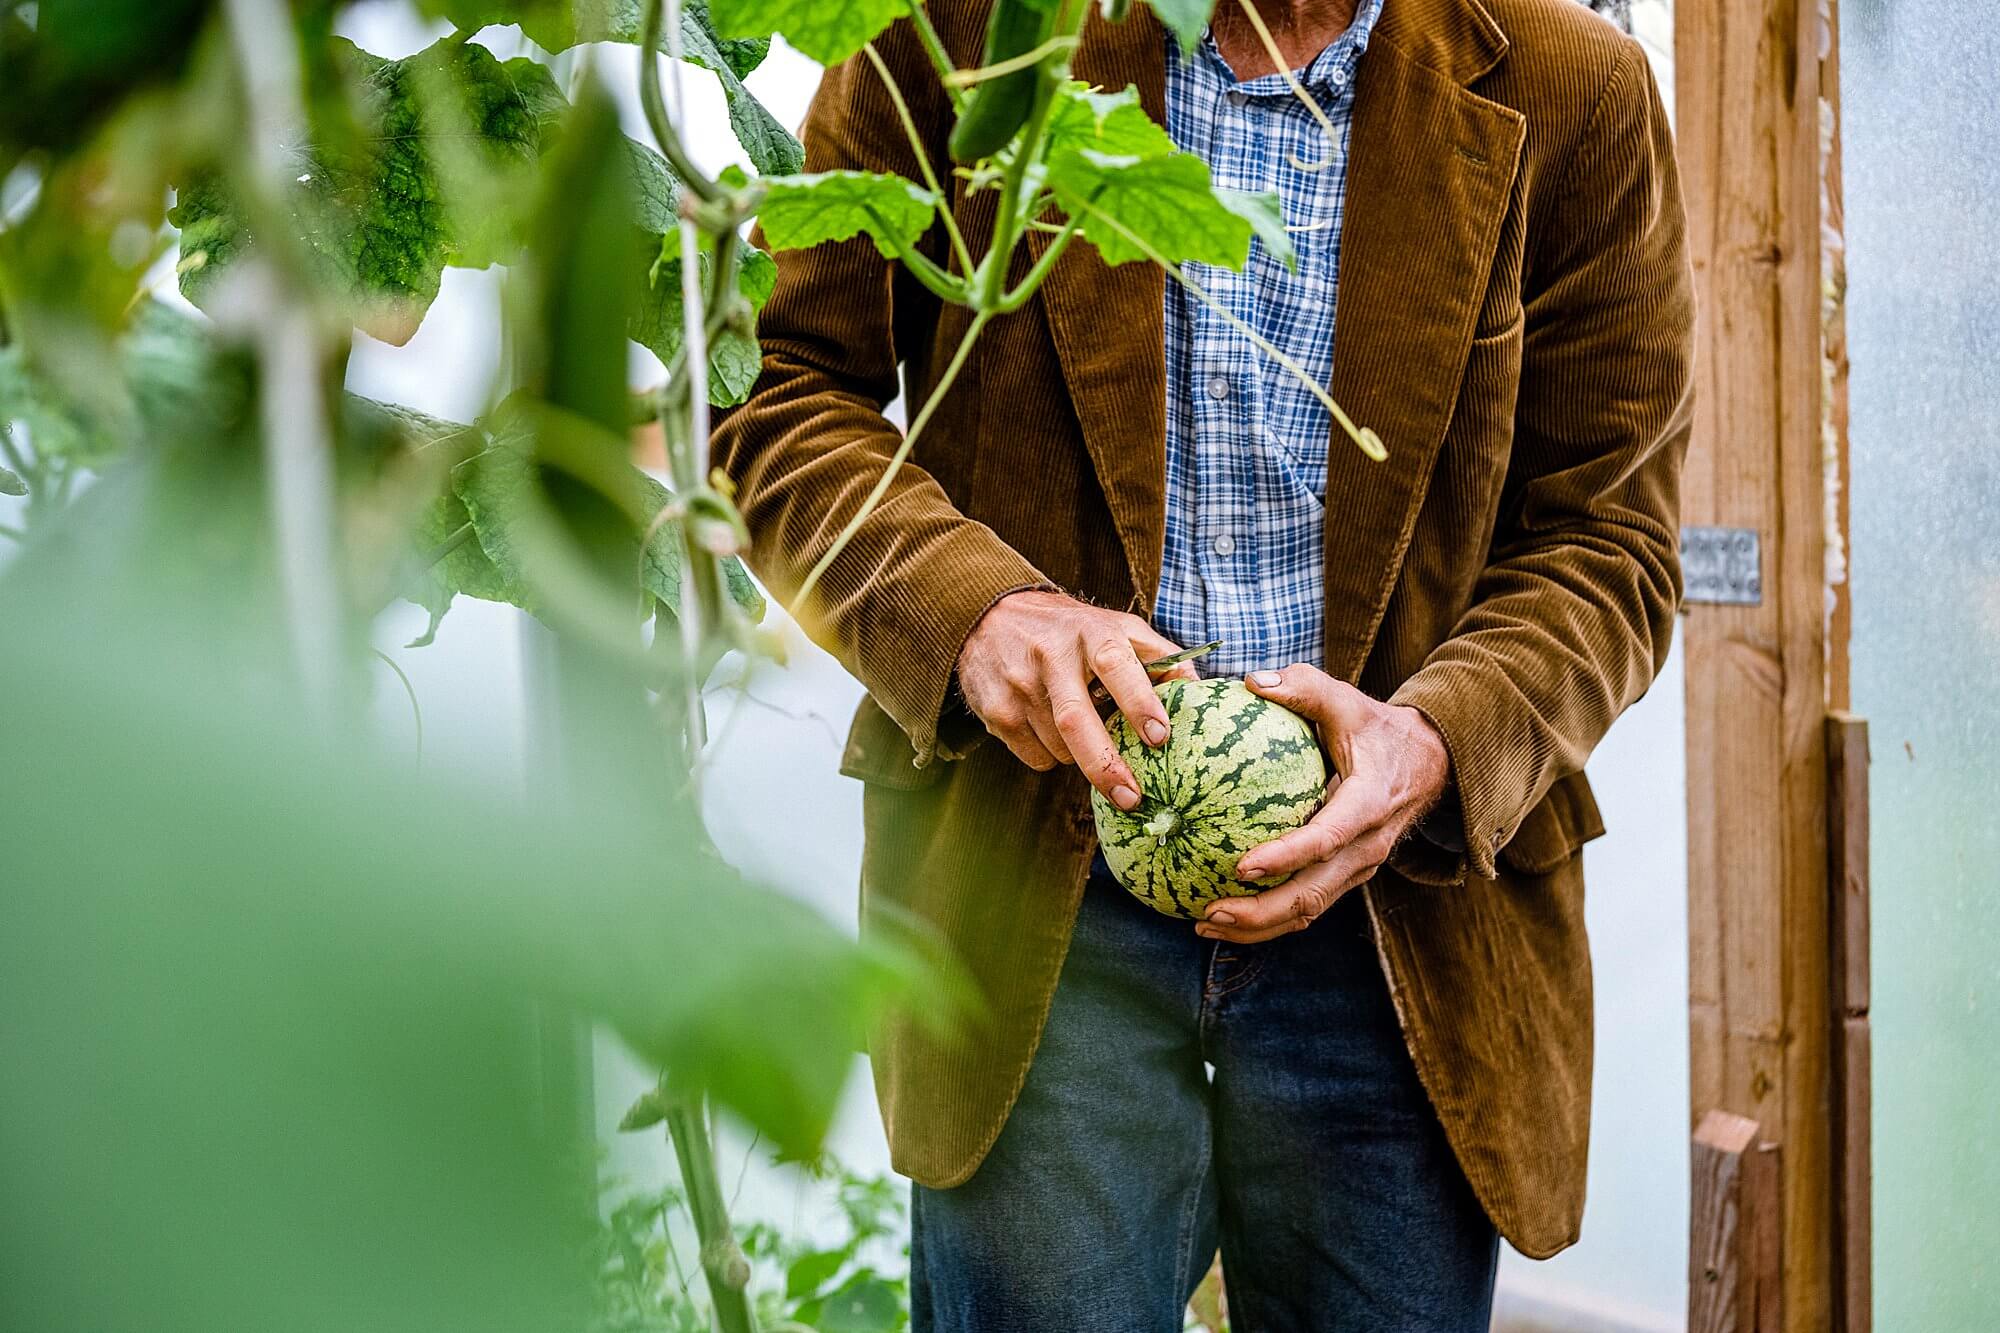 charles dowding picks and shares slices of watermelon grown in his homeacres greenhouse